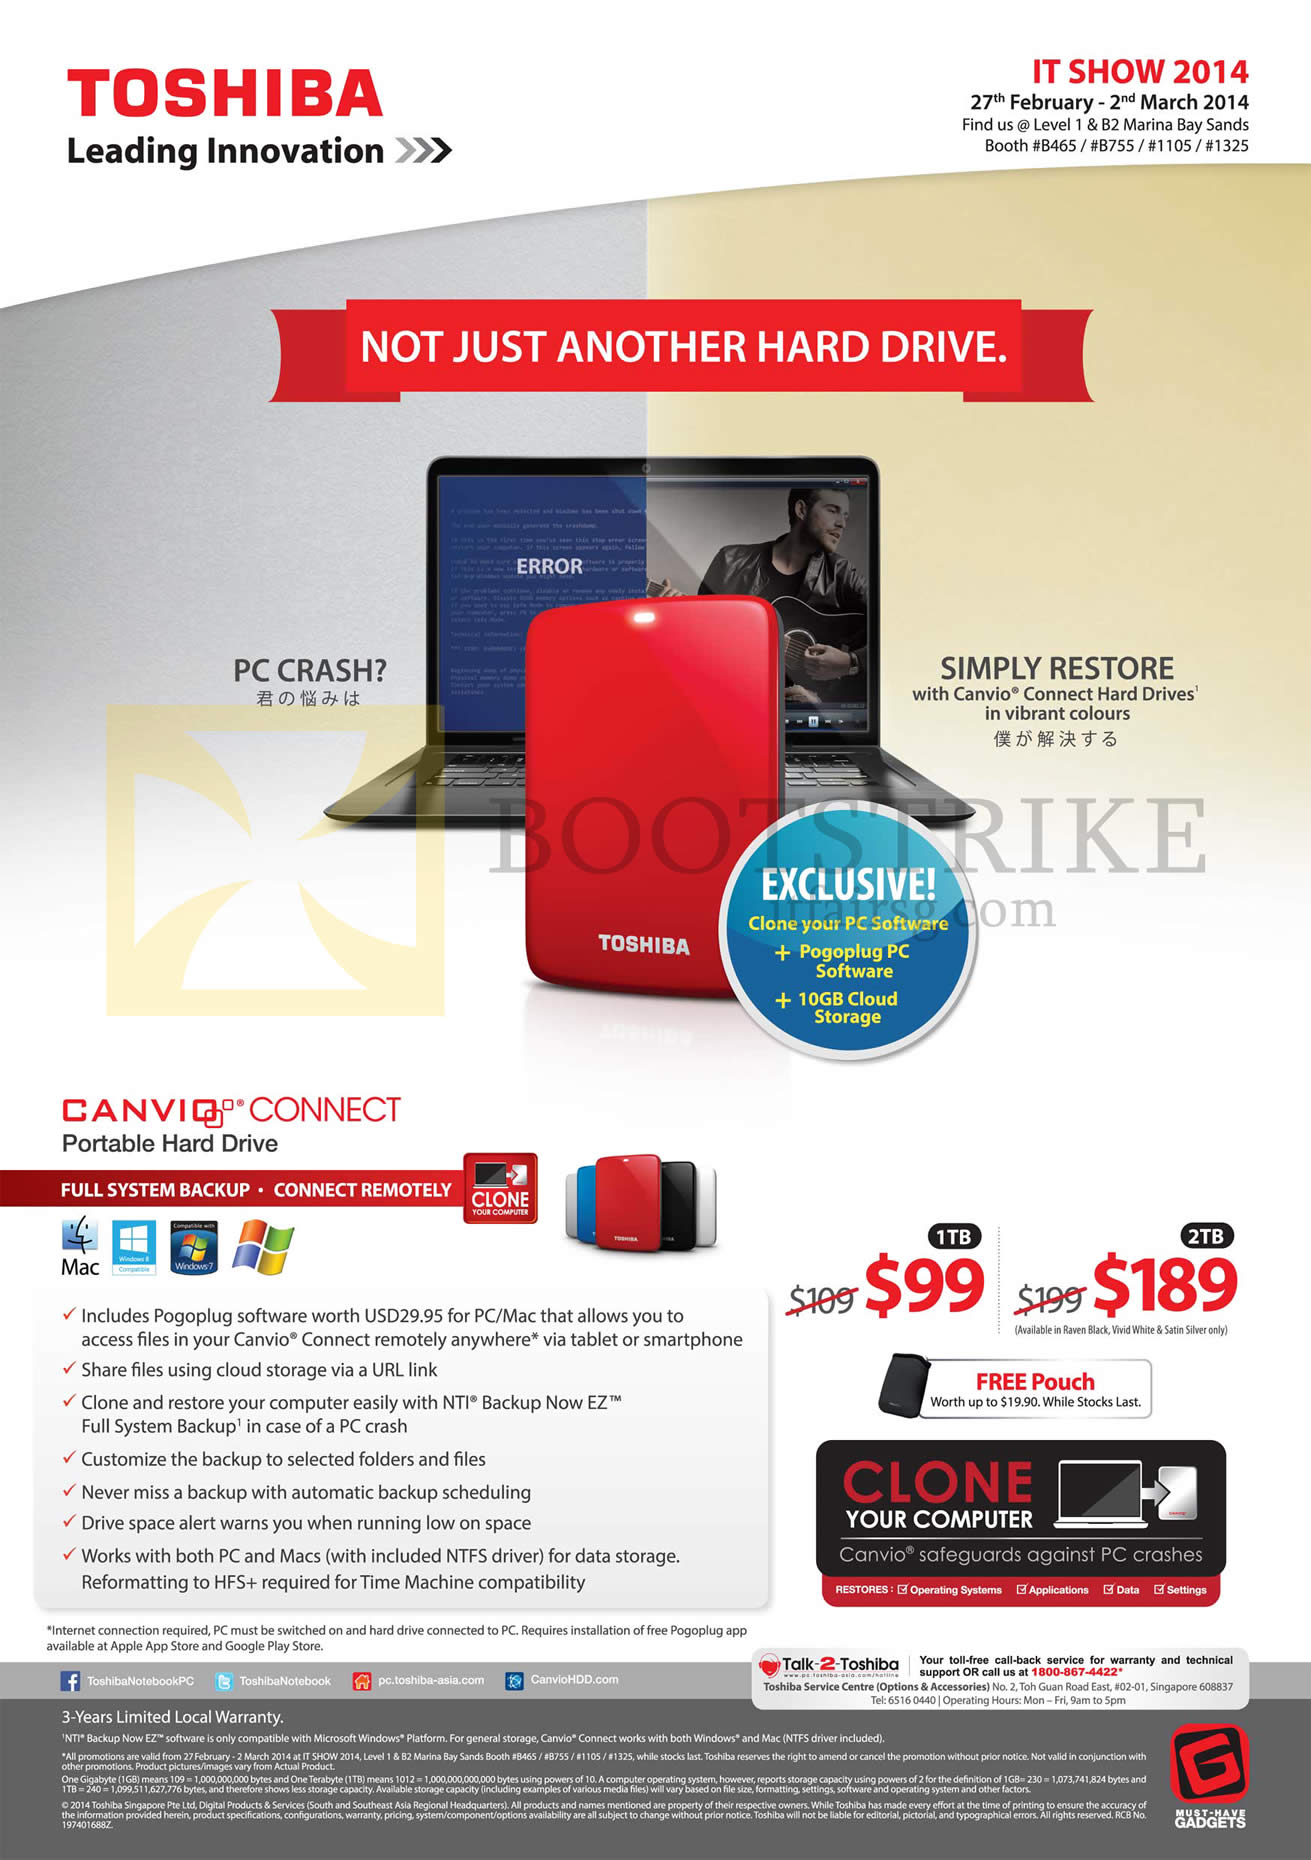 IT SHOW 2014 price list image brochure of Toshiba External Storage Canvio Connect 1TB 2TB